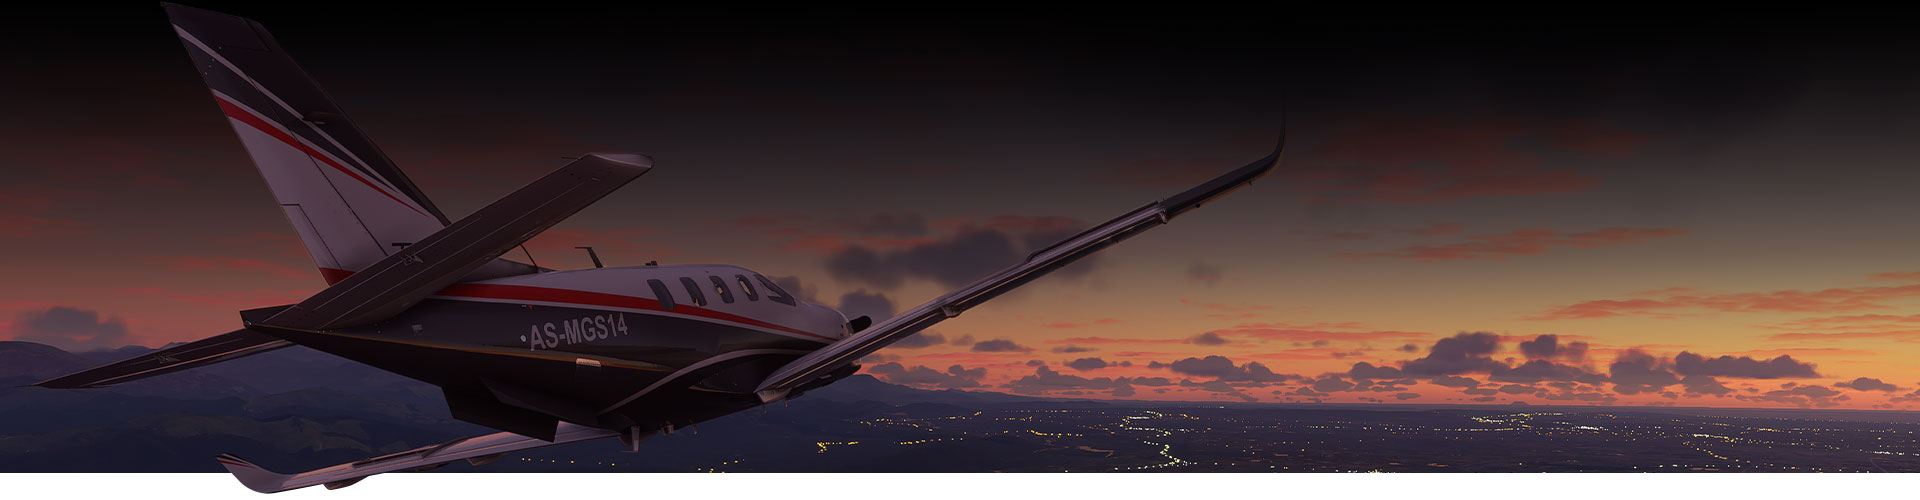 Plane from Microsoft Flight Simulator flying over a city at sunset